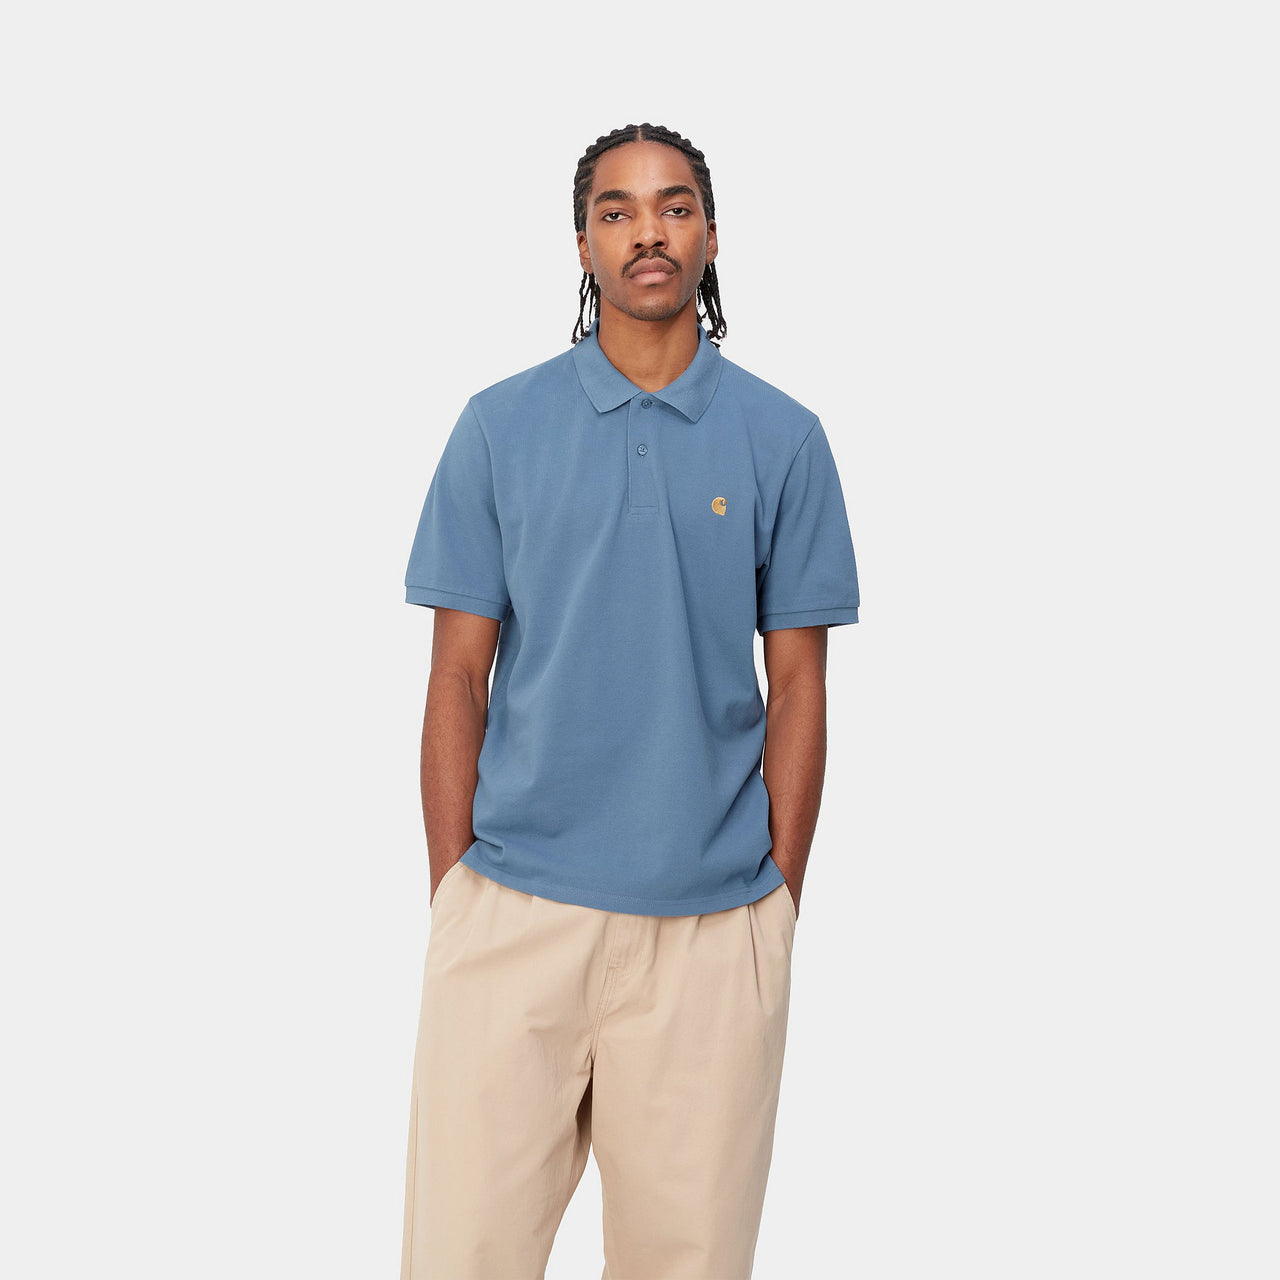 S/S CHASE PIQUE POLO BY CARHARTT WIP